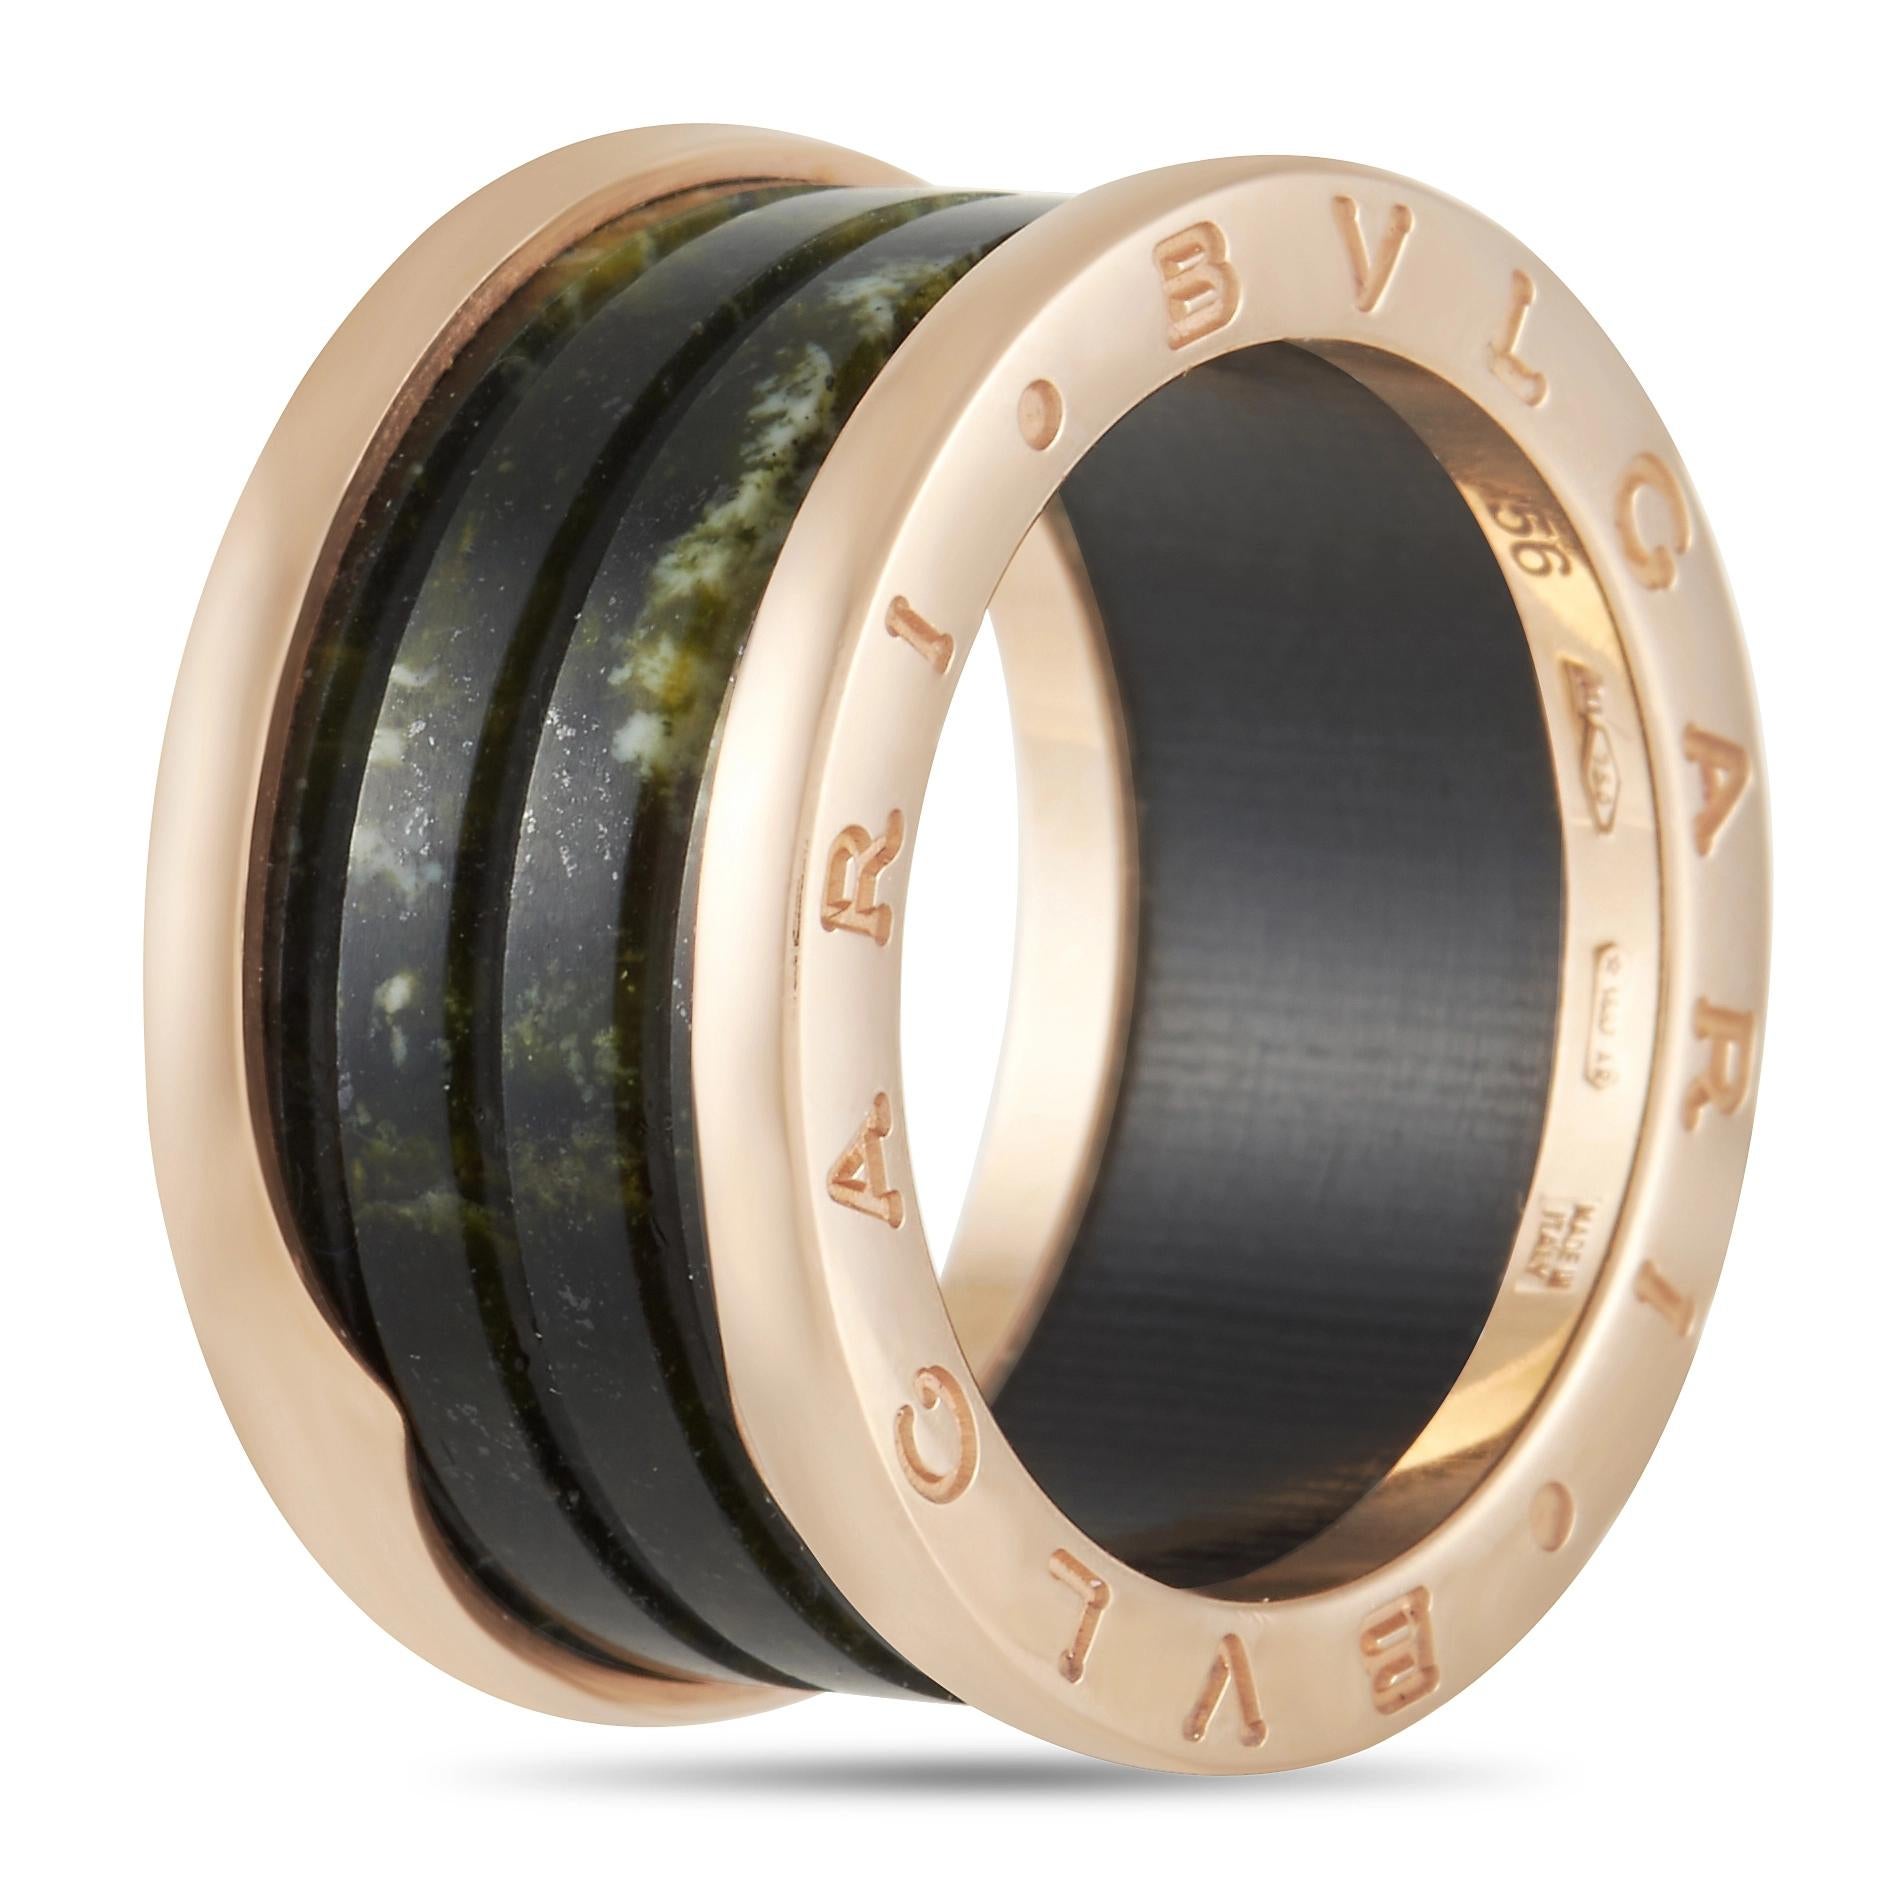 This Bvlgari B.Zero band ring is a confident, showstopping style that is destined make a statement. The 11mm wide band beautifully juxtaposes 18K Rose Gold with Green Marble to create a style that is anything but ordinary. The luxury brand’s